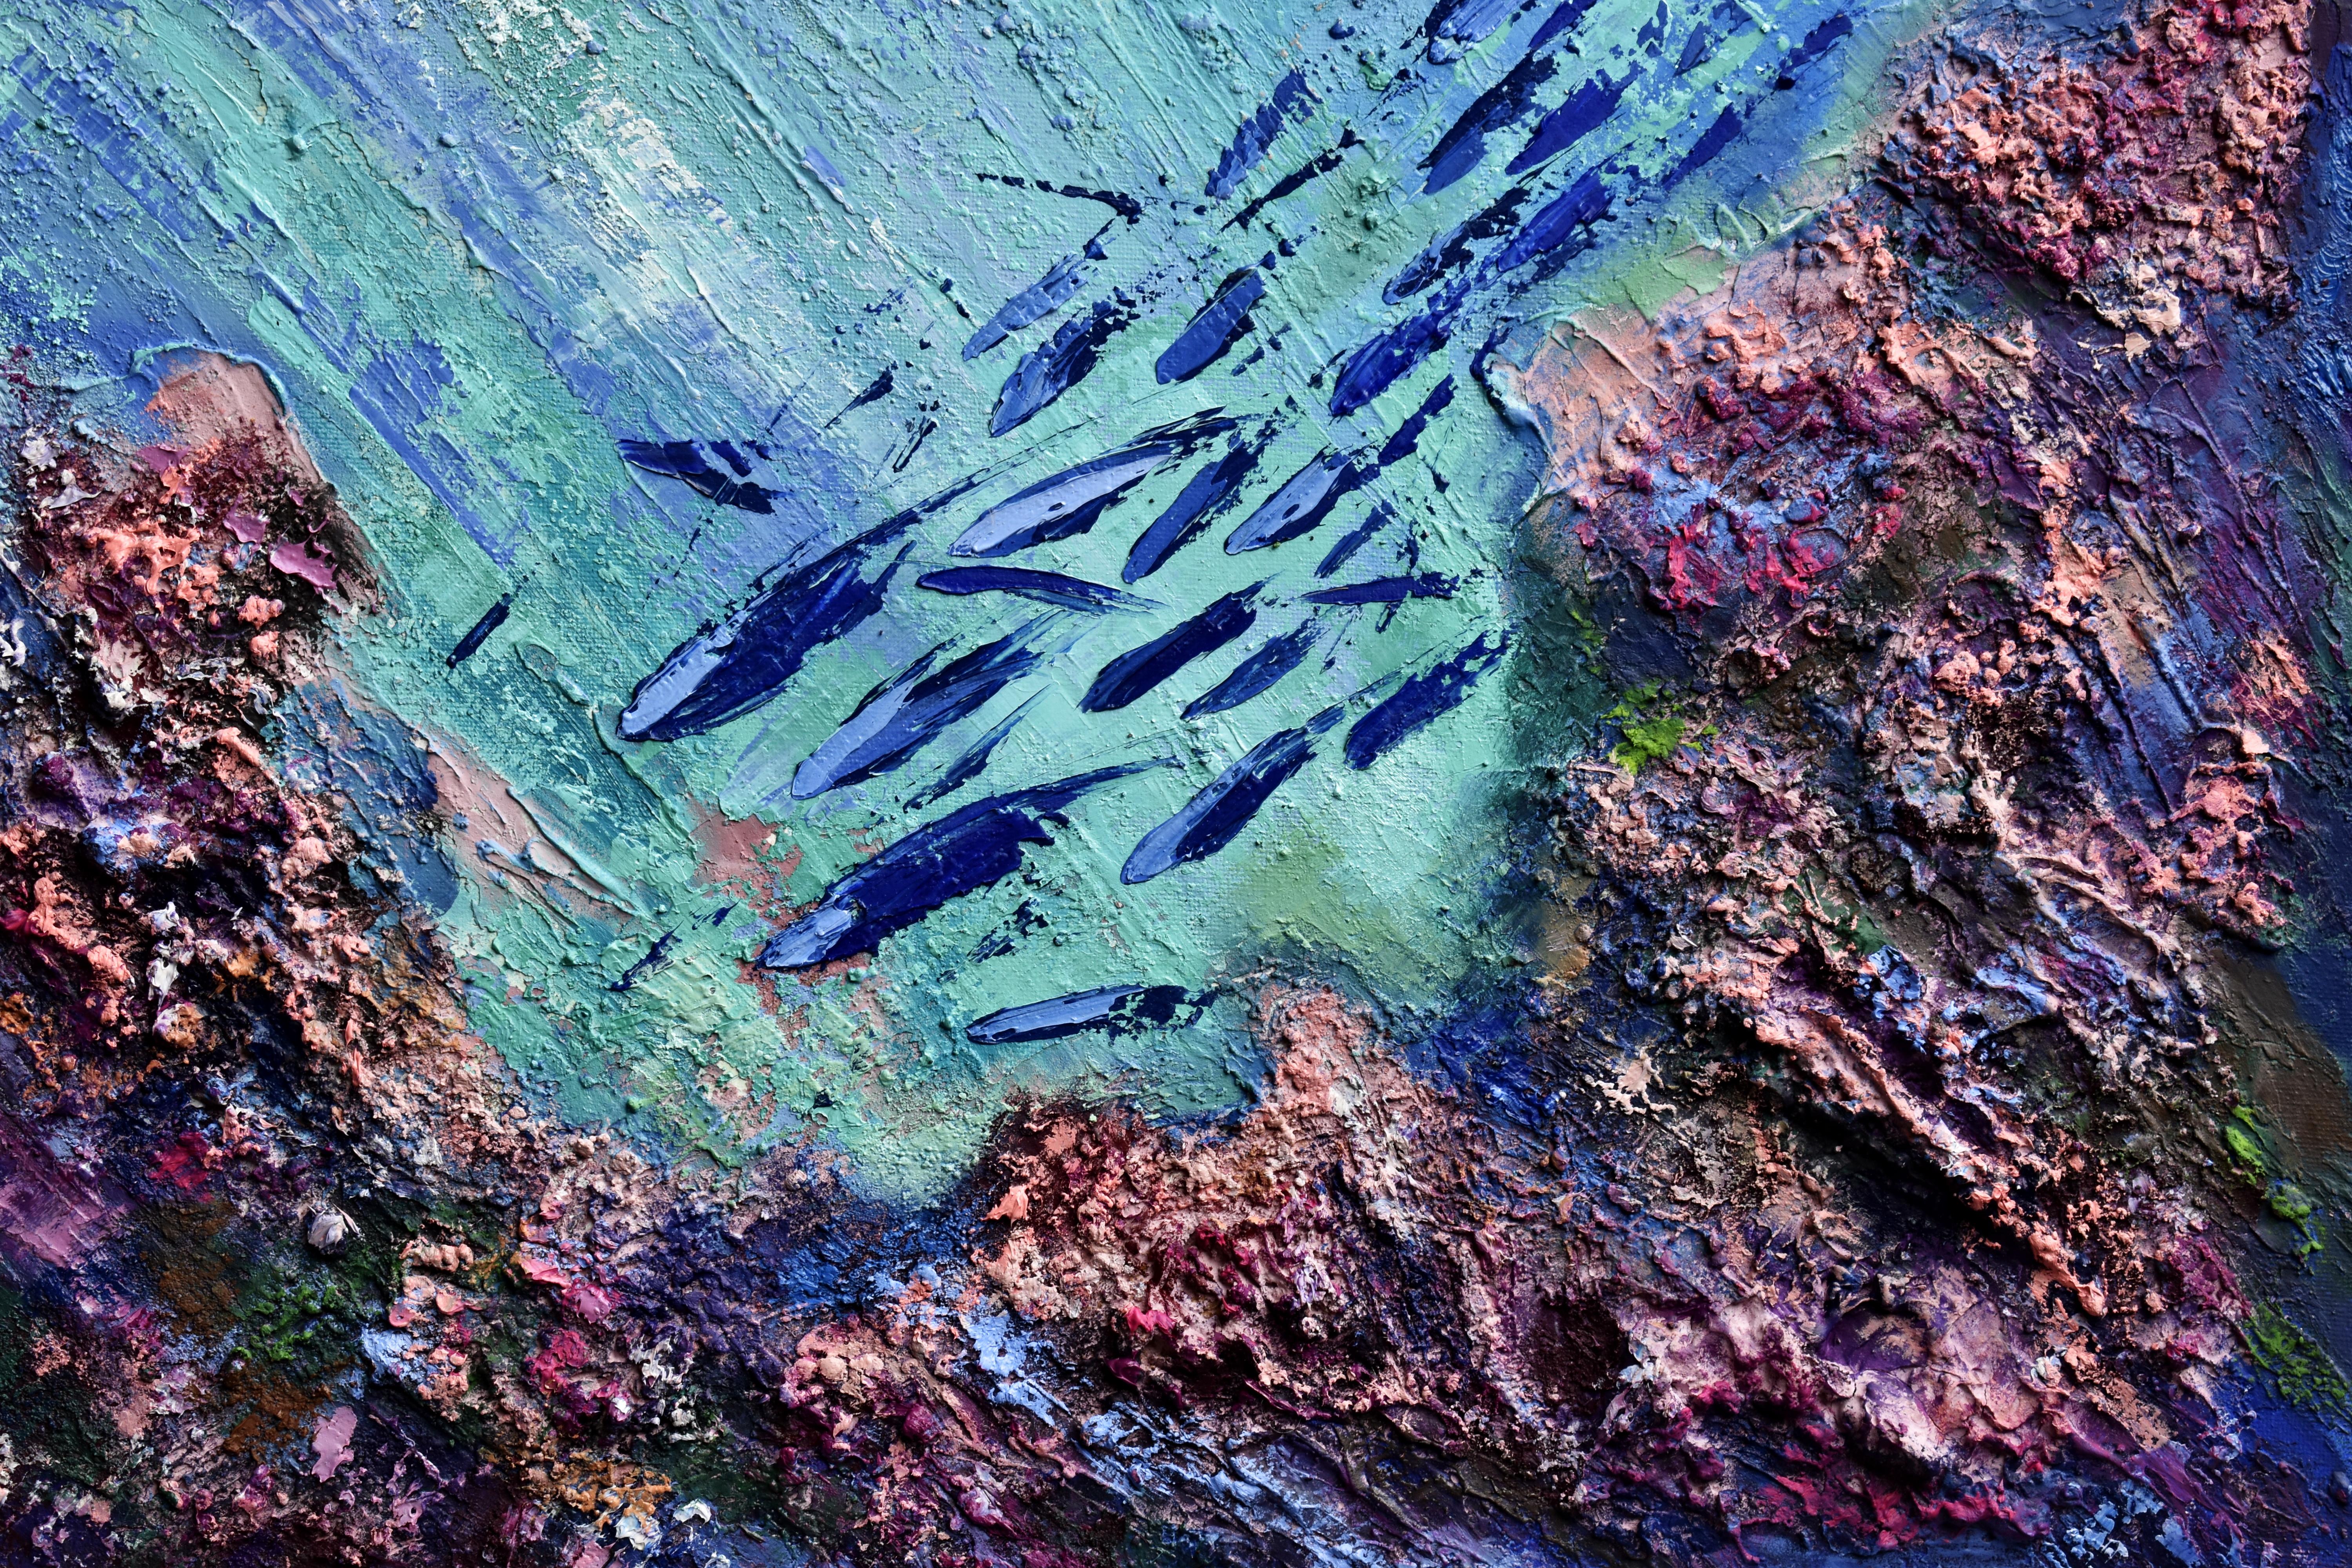 * Title: Abstract Coral Reef Hawaii
* Size: 50 x 50 cm 20x20